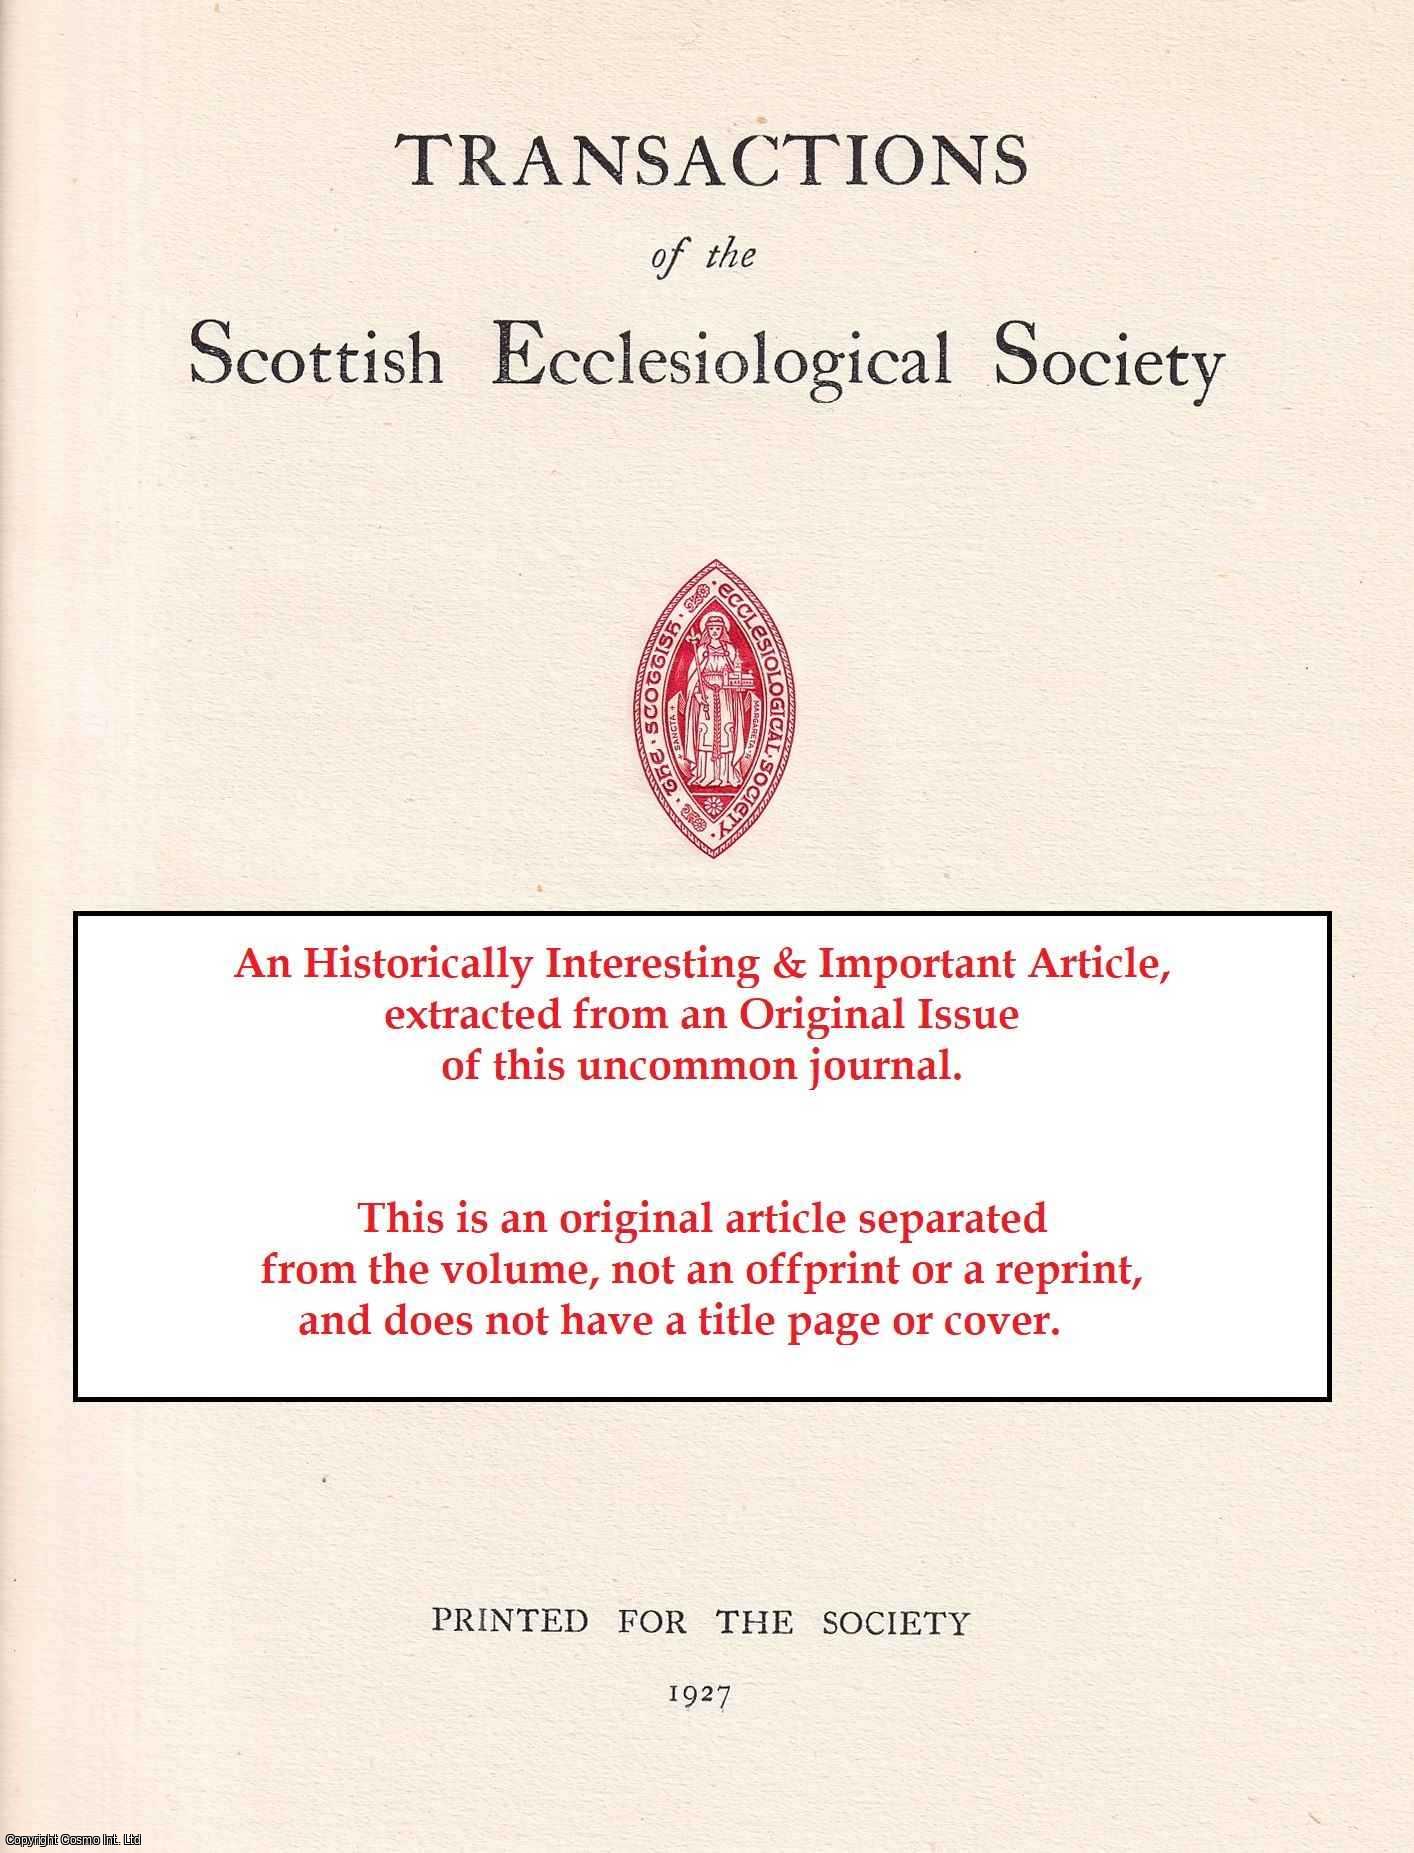 Rev Professor Cooper - Some Christian Symbols. An original article from the Transactions of the Scottish Ecclesiological Society, 1915.